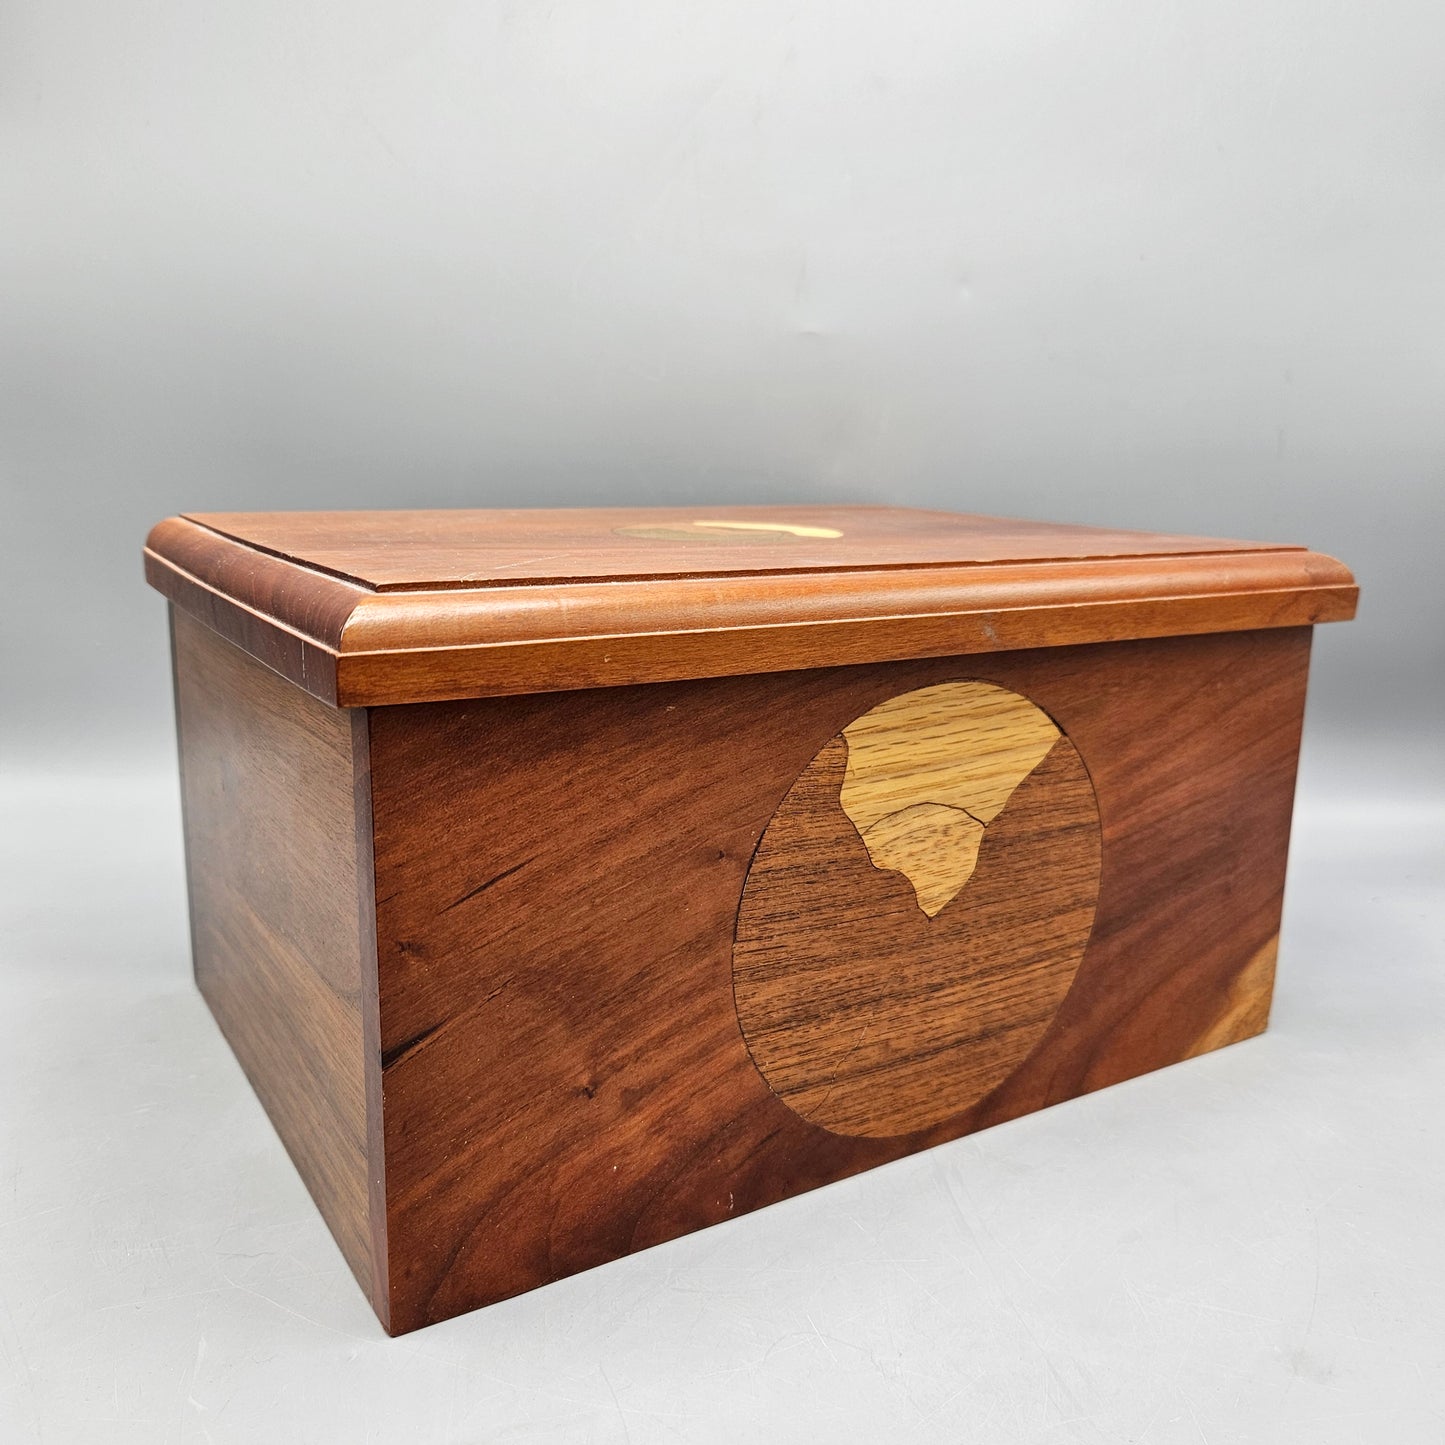 Vintage Wooden Inlaid Jewelry Box